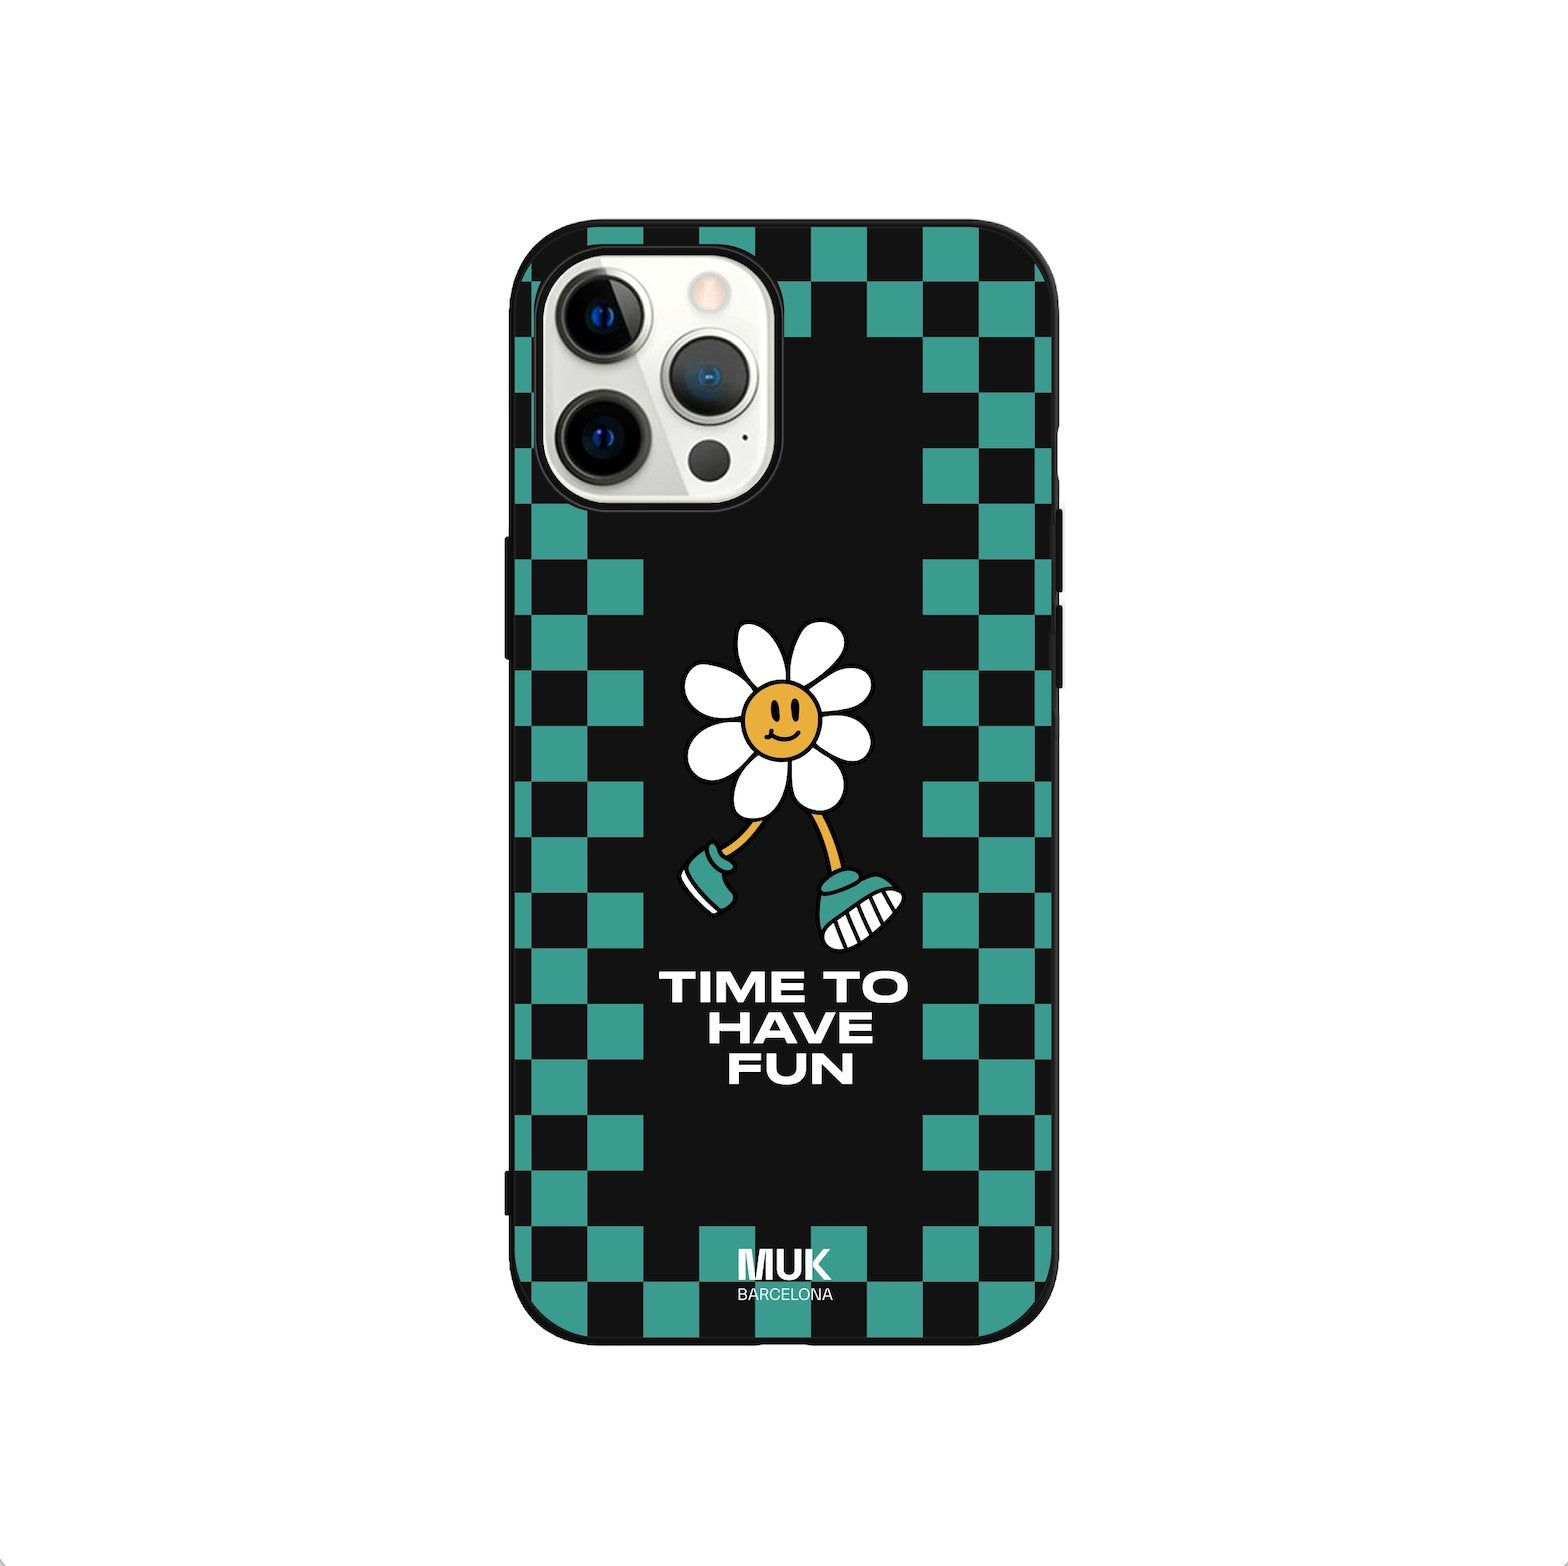 Black TPU  Phone Case with checkered pattern in lagoon color and daisy design and phrase "time to have fun" in white.
